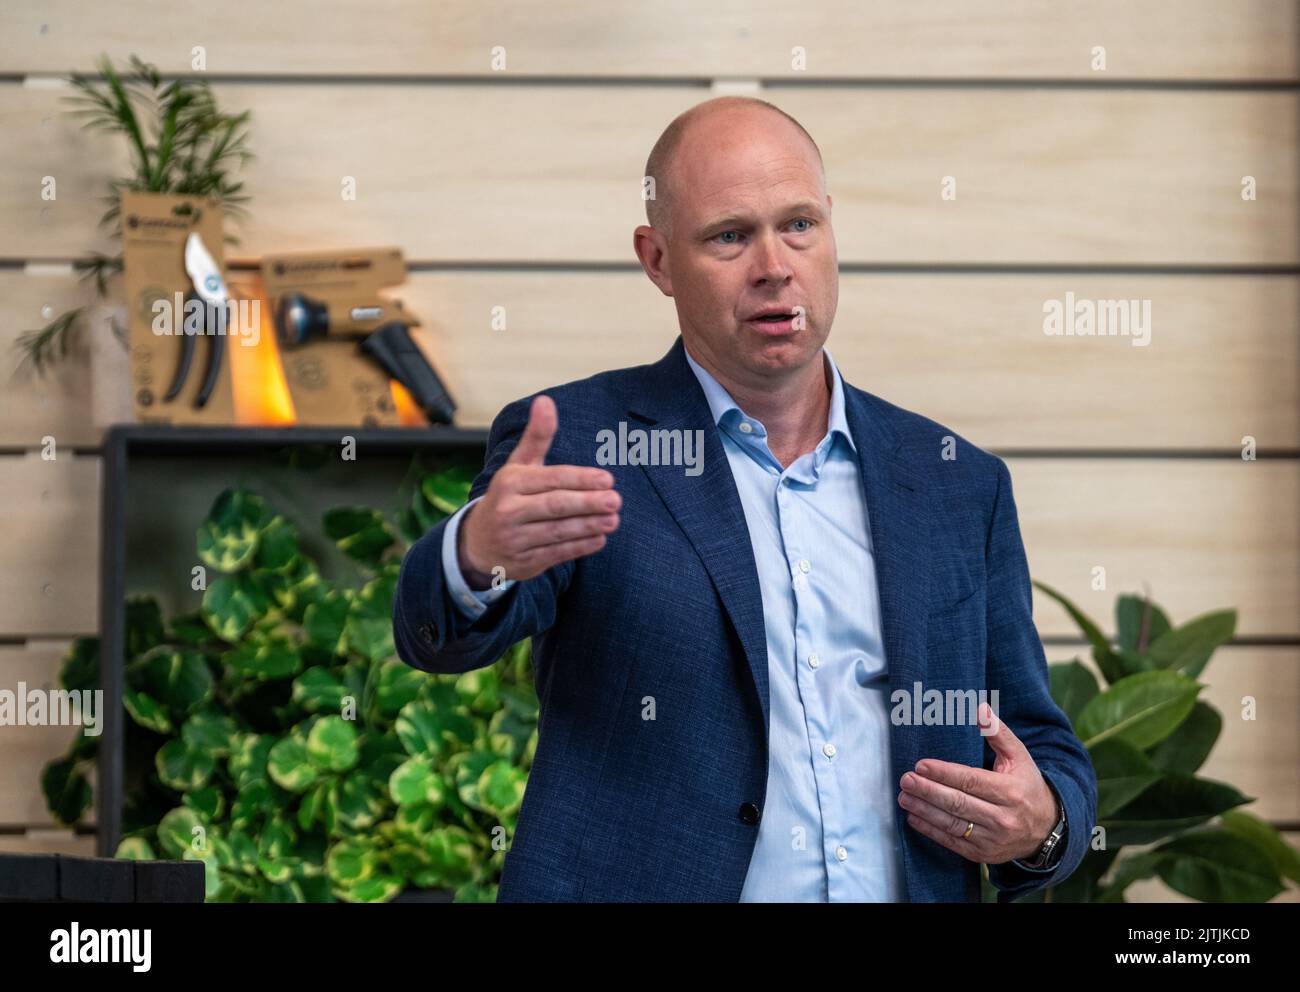 Ulm, Germany. 31st Aug, 2022. Pär Aström, Managing Director of the Gardena business unit, speaks at a press conference. Gardena GmbH, which specializes in gardening tools and irrigation systems, is part of the Husqvarna Group and will present its corporate figures for the first half of 2022. Credit: Stefan Puchner/dpa/Alamy Live News Stock Photo